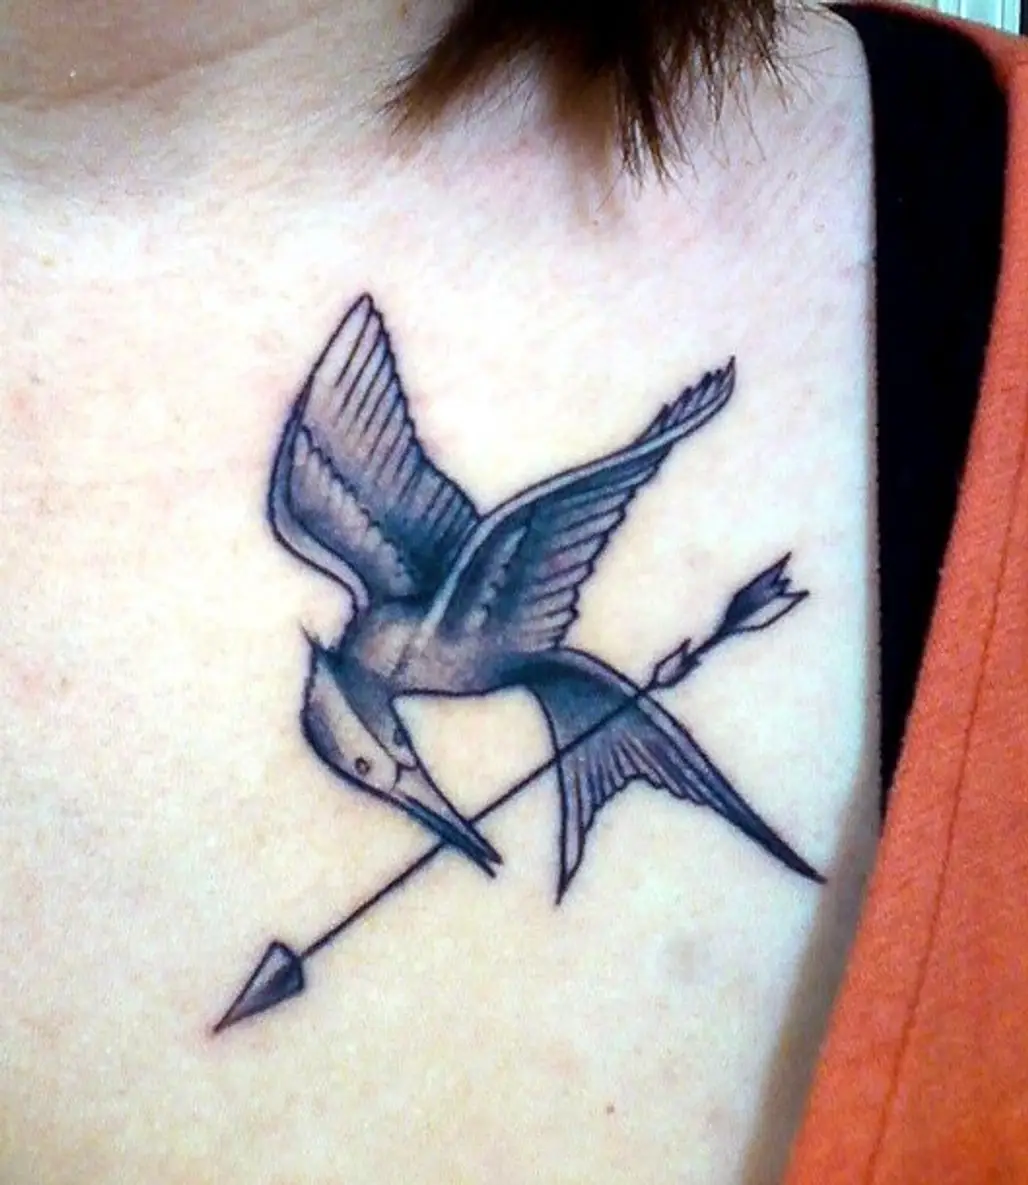 Tattoo inspiration from Divergent, The Mortal Instruments, and The Hunger  Games